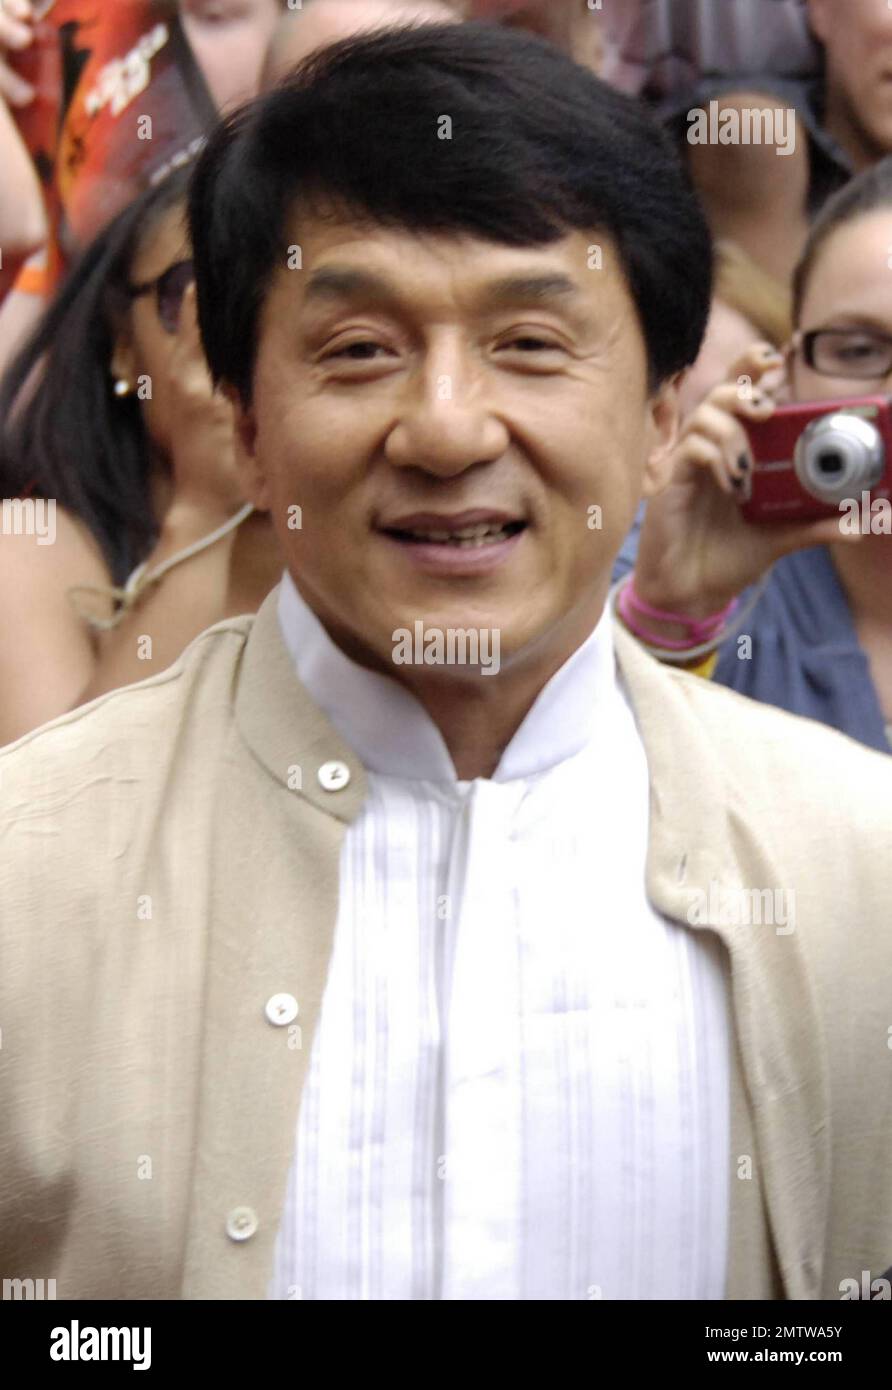 Jackie Chan arrives at a screening of "The Karate Kid" held at AMC River East 21 cinemas.  "The Karate Kid" is 12-year-old Jaden Smith's, son of superstar actor Will Smith, third film.  Will was also on hand to support his son, as the two gladly met with waiting fans. Chicago, IL. 05/26/10.   . Stock Photo